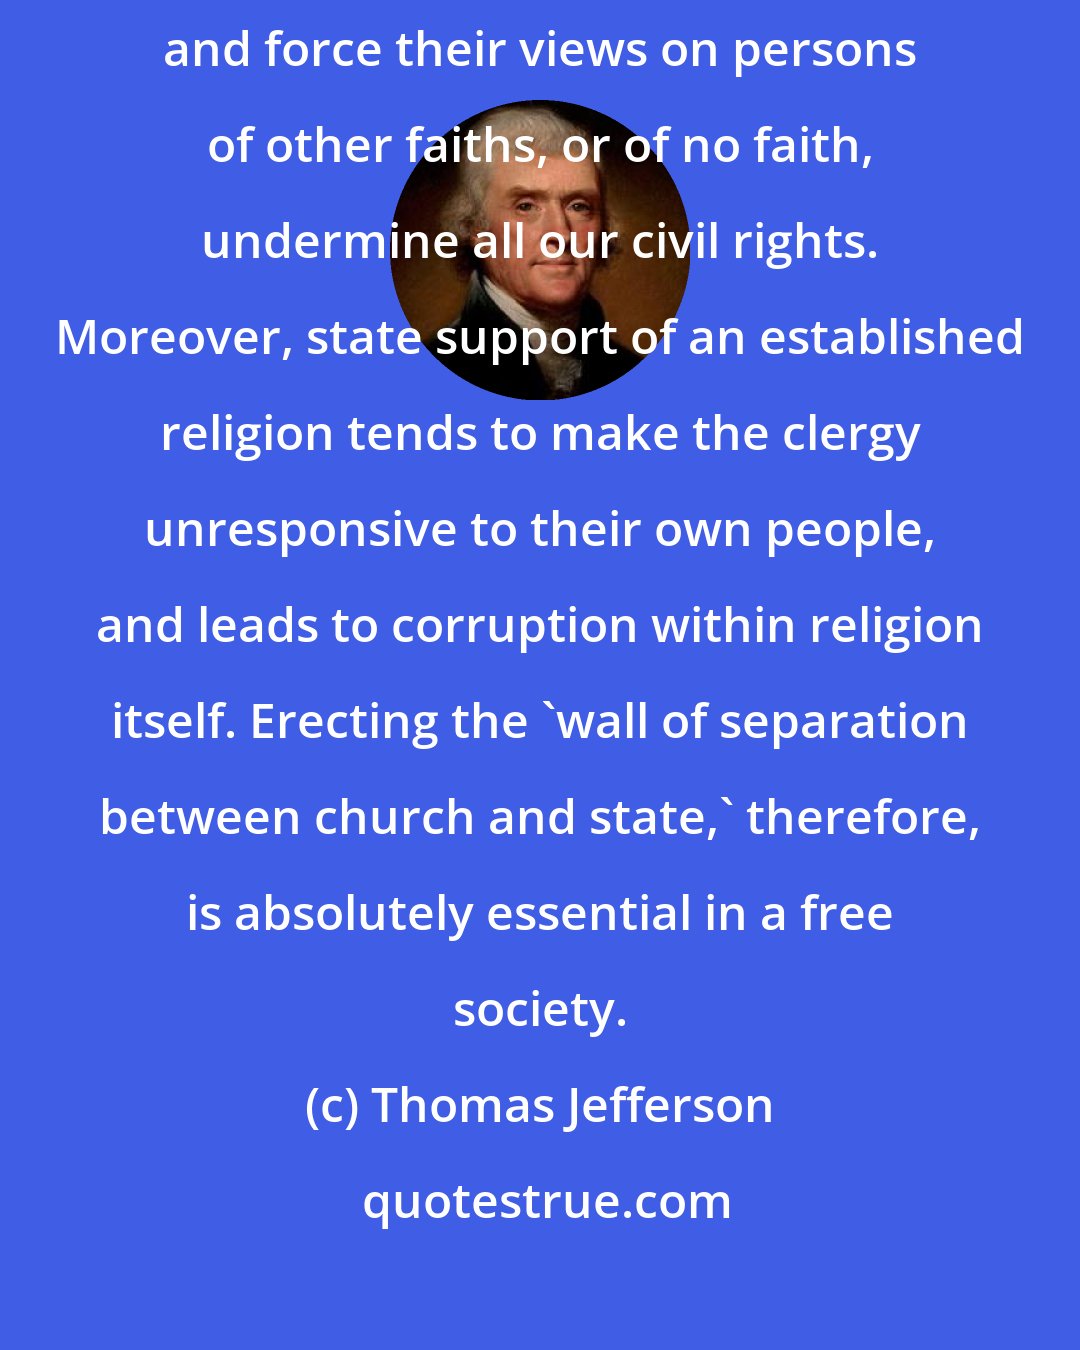 Thomas Jefferson: Religious institutions that use government power in support of themselves and force their views on persons of other faiths, or of no faith, undermine all our civil rights. Moreover, state support of an established religion tends to make the clergy unresponsive to their own people, and leads to corruption within religion itself. Erecting the 'wall of separation between church and state,' therefore, is absolutely essential in a free society.